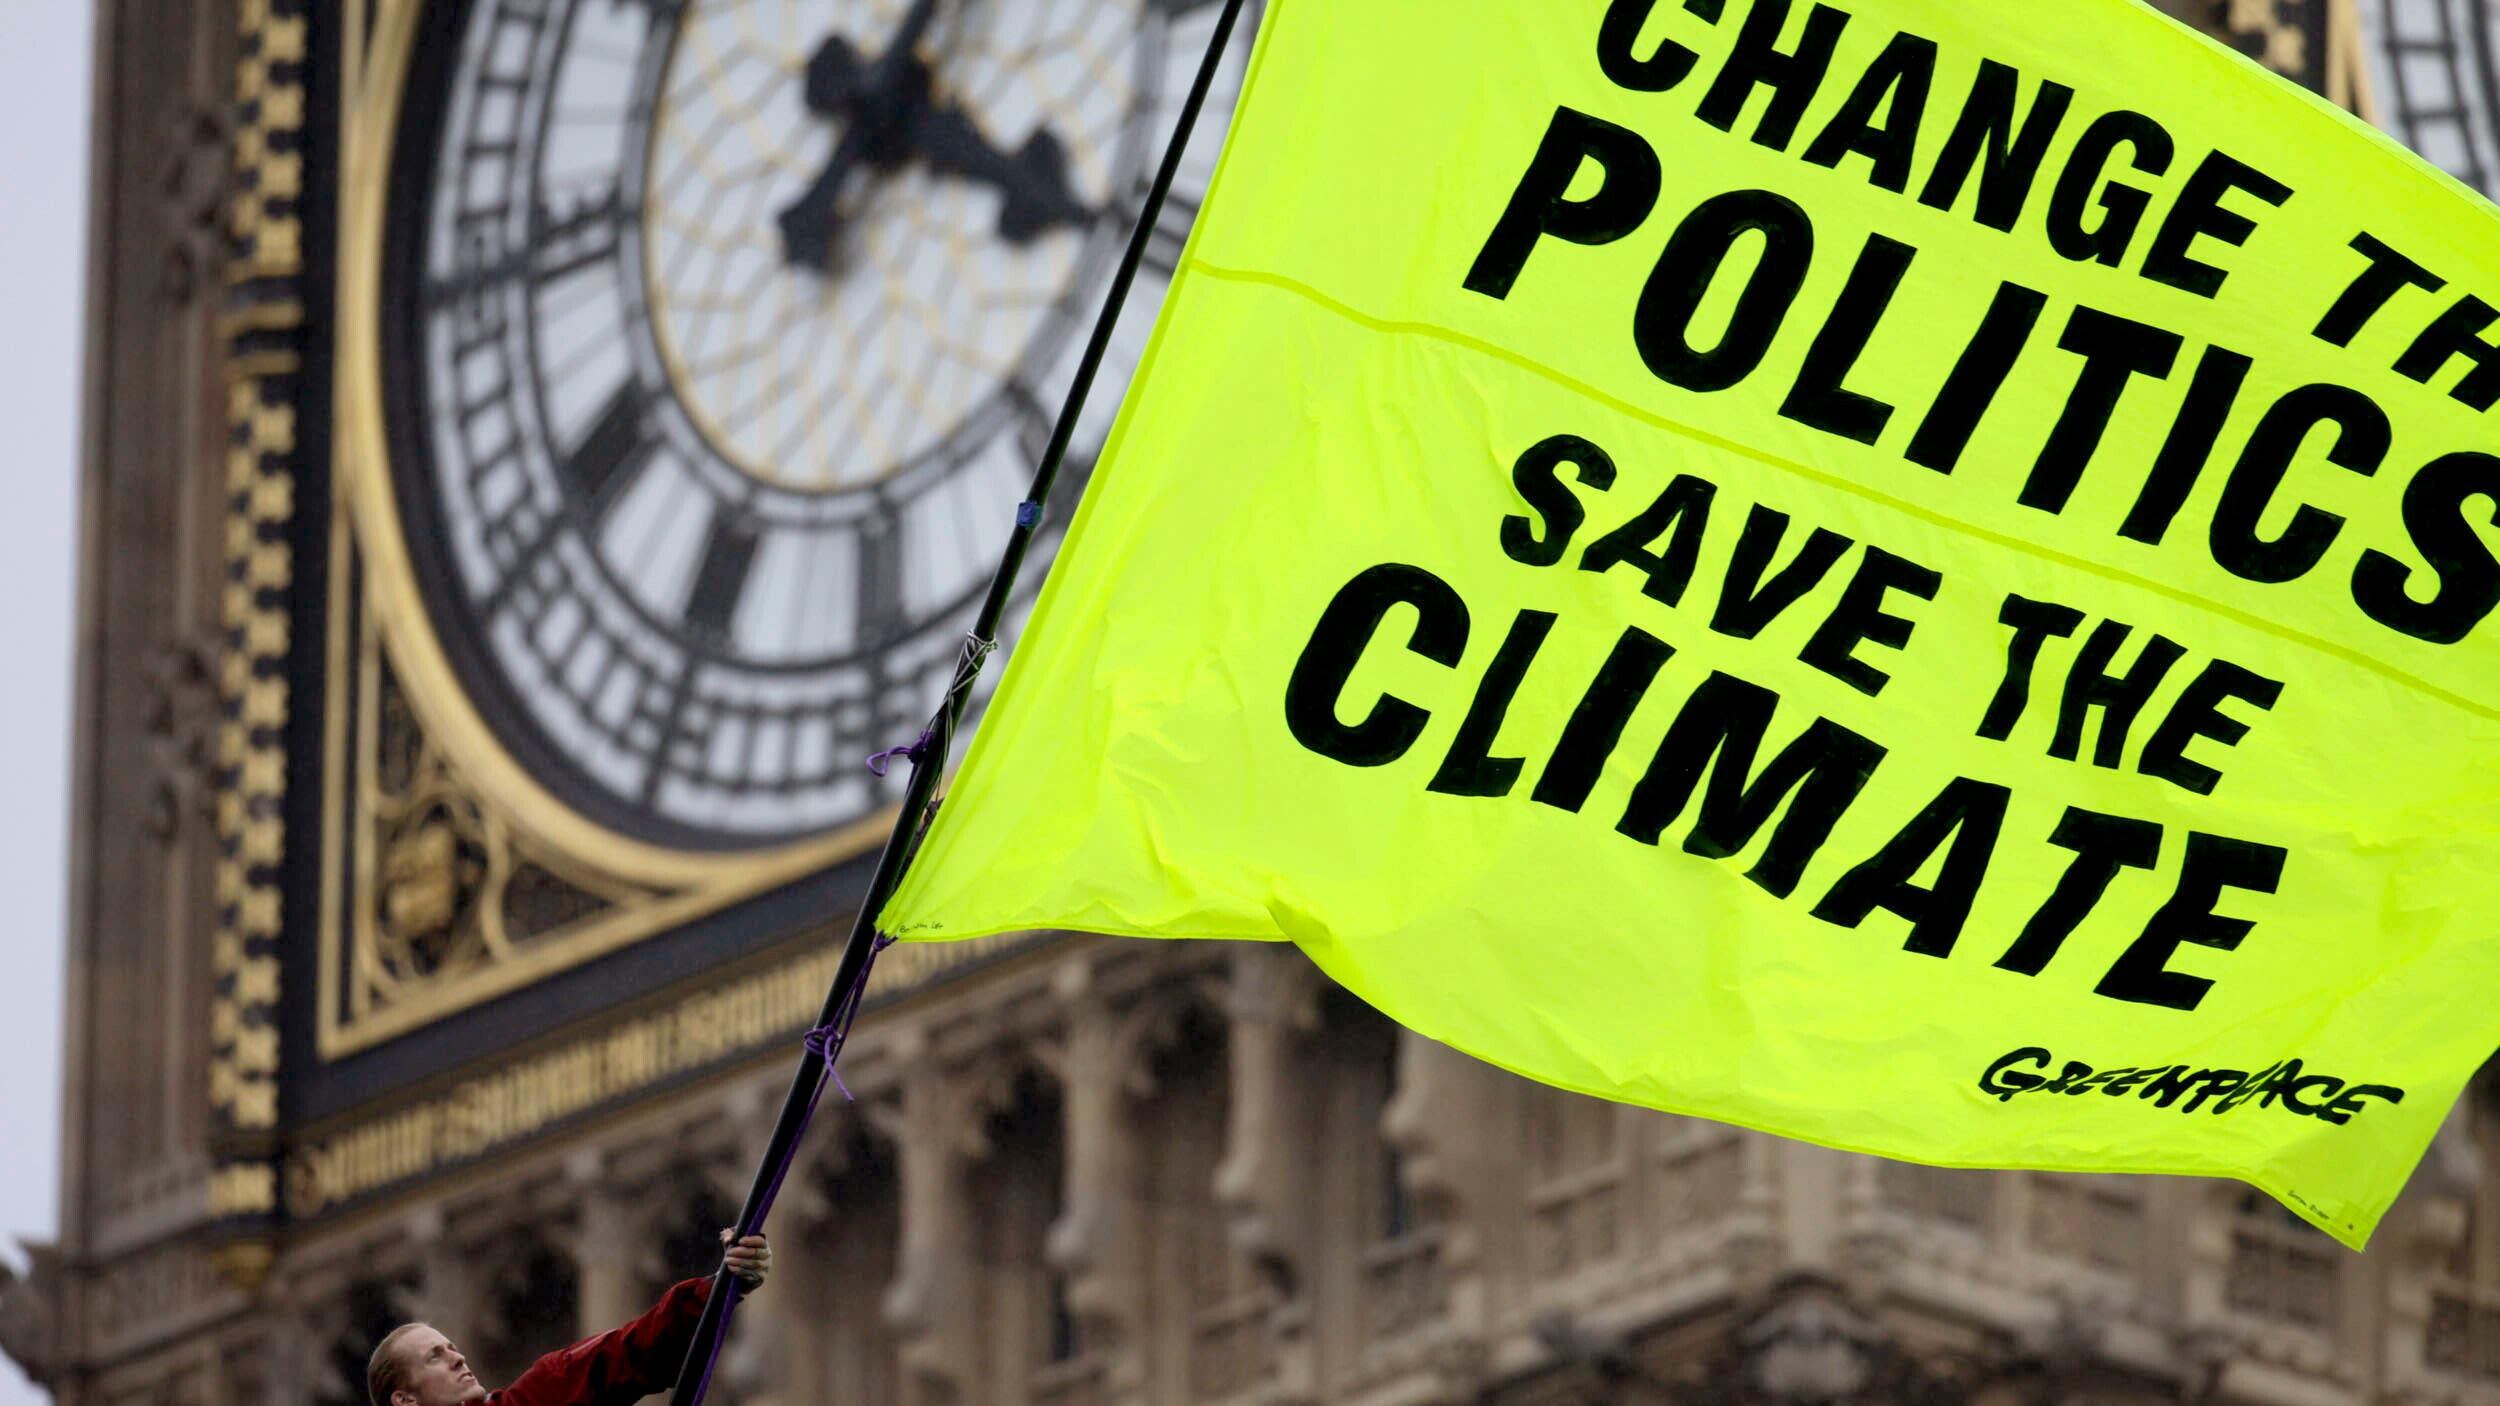 Greenpeace has launched a campaign to encourage people to become ‘climate voters’ at the next general election (Nick Cobbing/Greenpeace/PA)